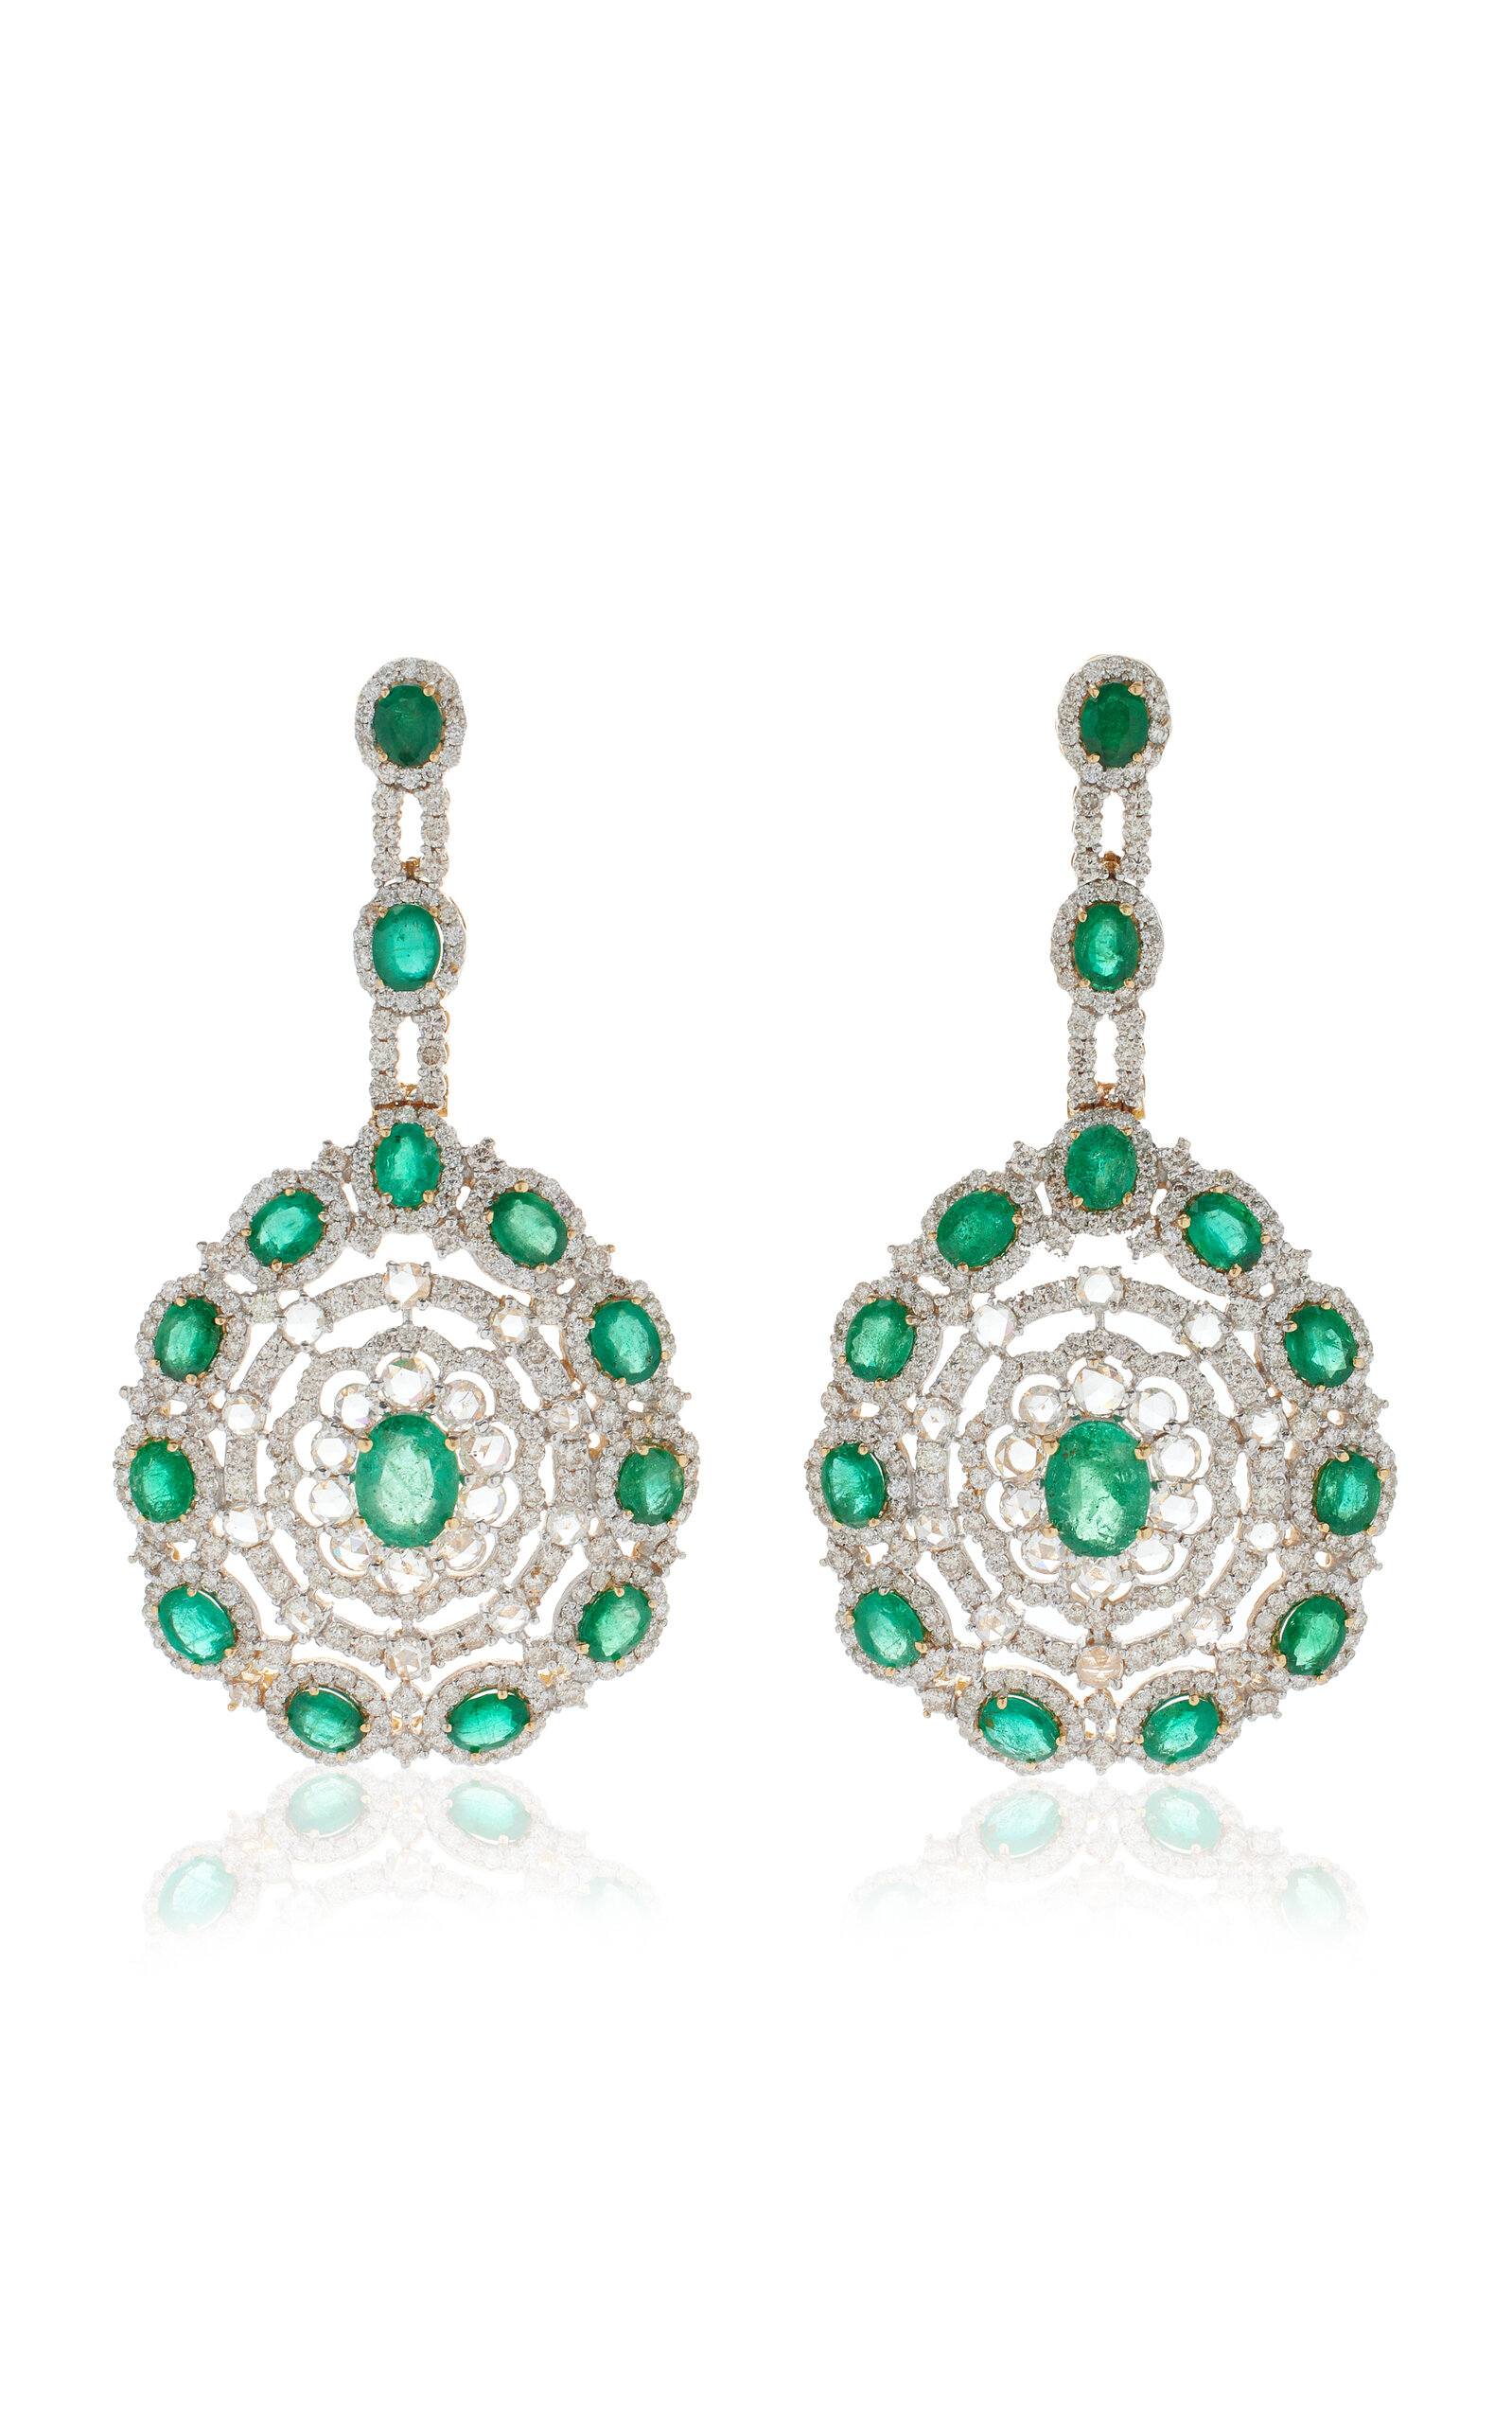 Amrapali One Of A Kind 18k White Gold Emerald & Diamond Blossom Earrings In Green